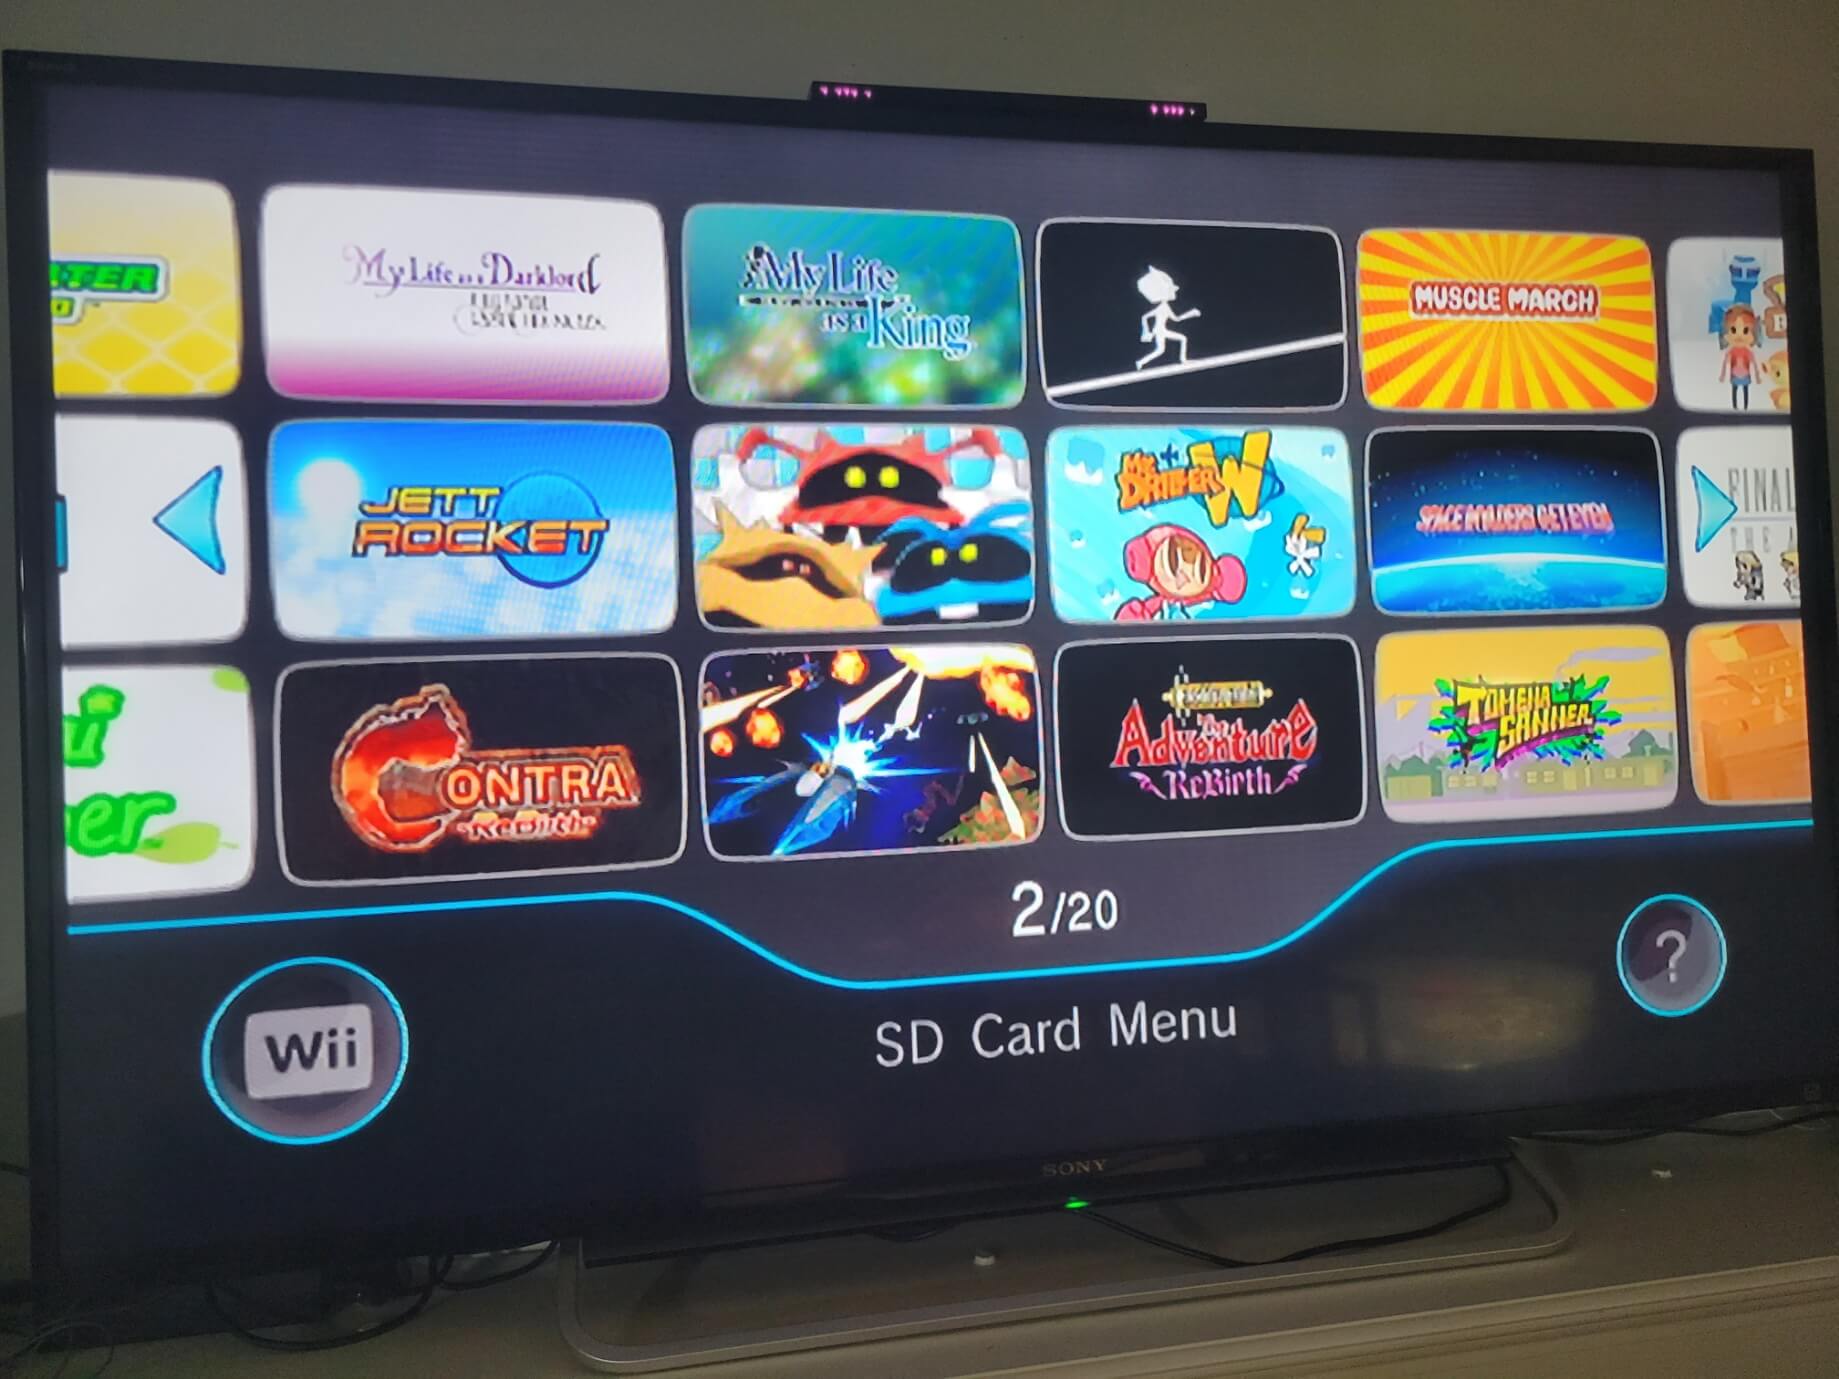 Wii SD Menu with WiiWare Games